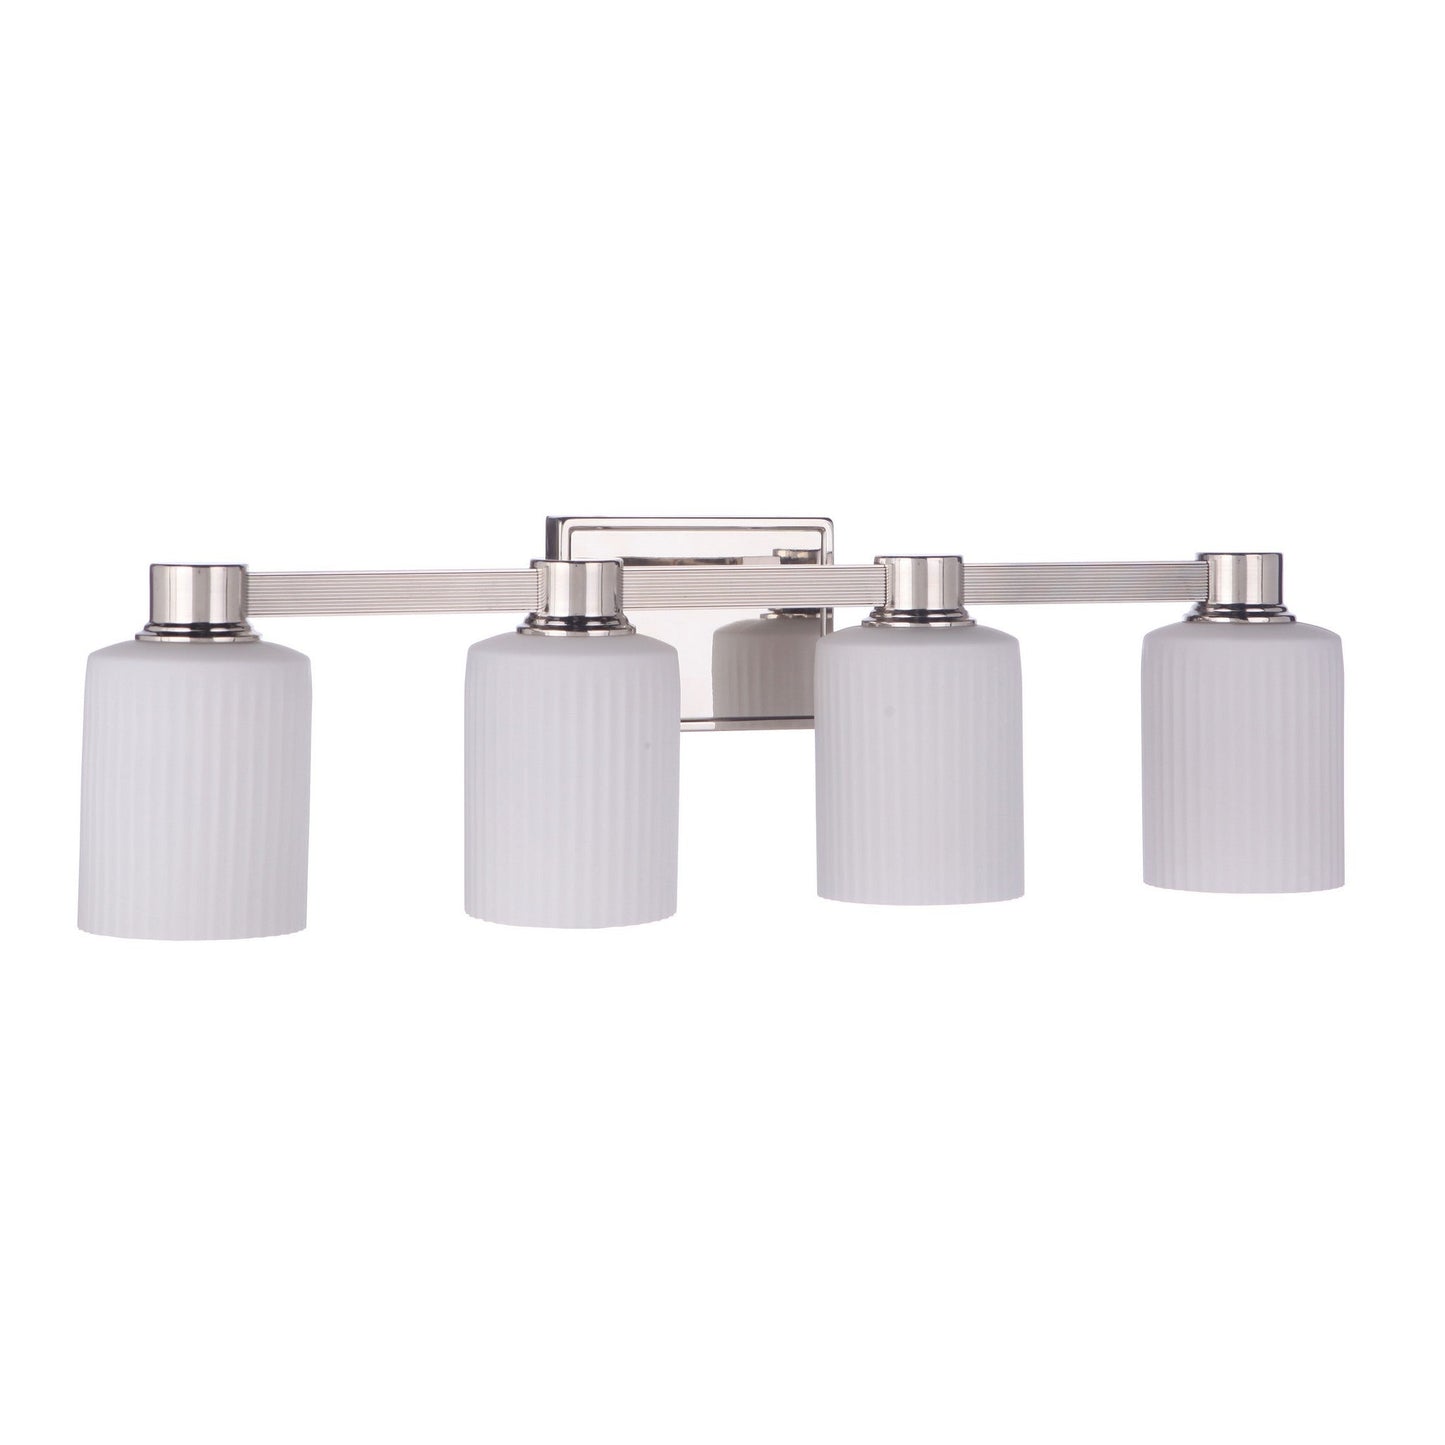 Craftmade Bretton 28" 4-Light Polished Nickel Vanity Light With White Fluted Glass Shades